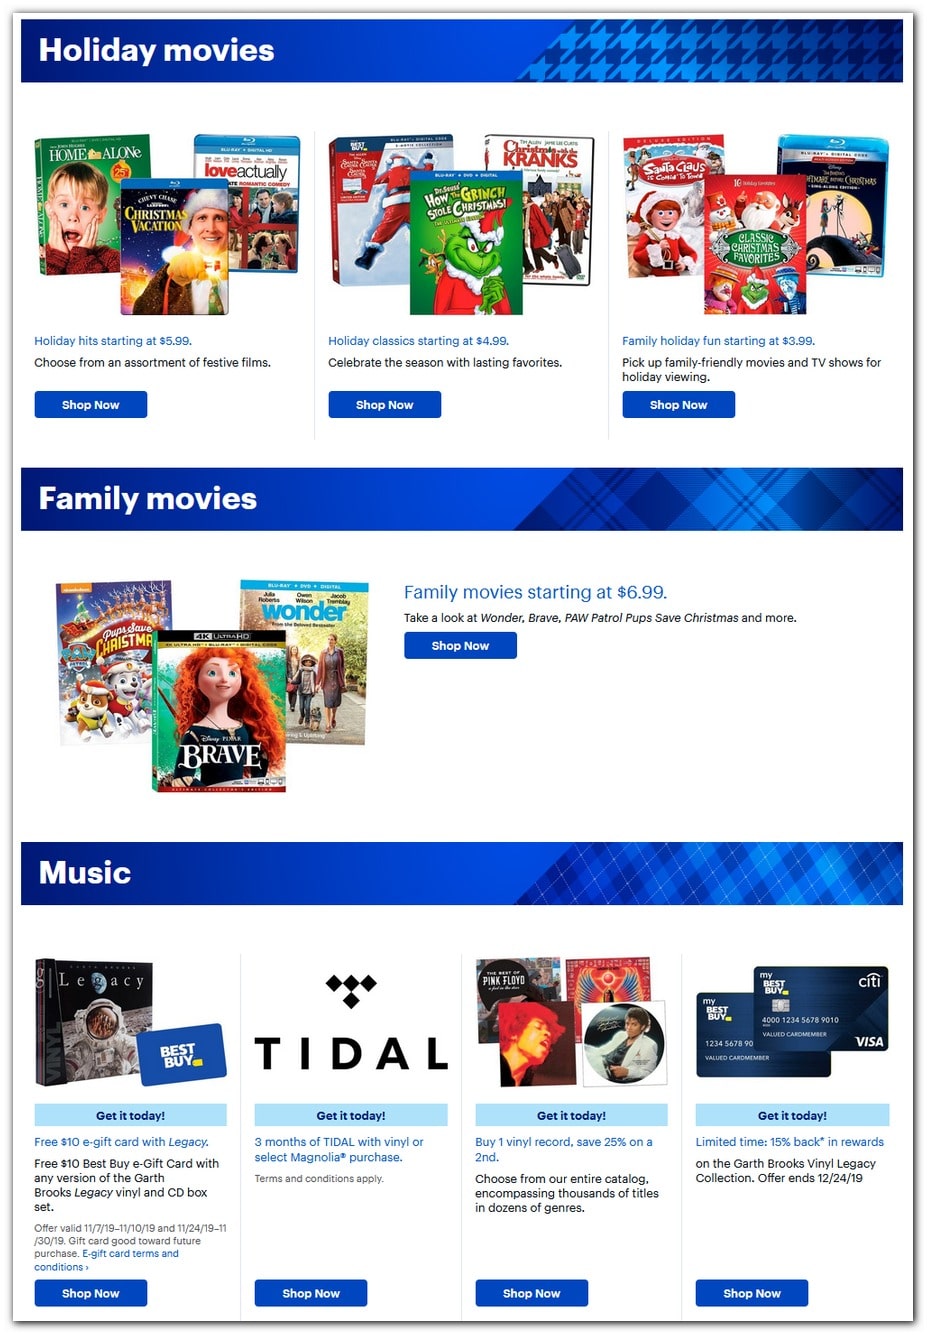 Best Buy Black Friday Ad 2019 - Sale Live Now